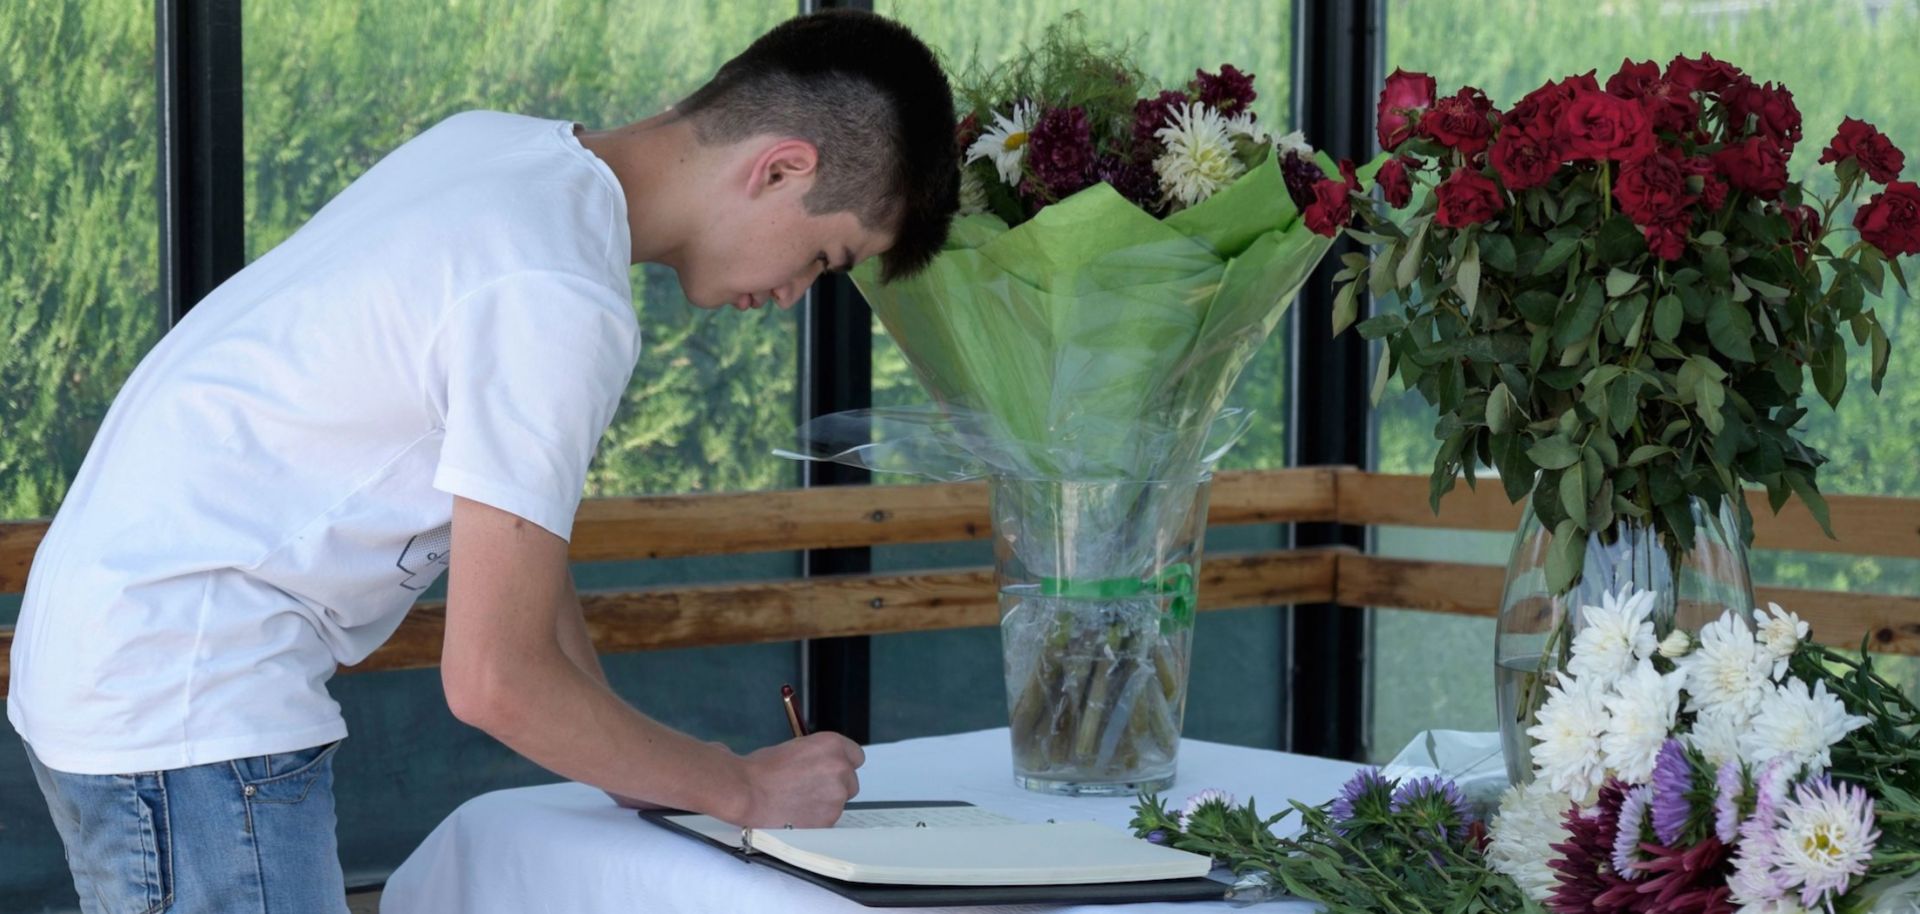 A man signs a condolence book at the U.S. Embassy in Dushanbe, Tajikistan, for the four bicyclists killed in a terrorist attack on July 29, 2018.